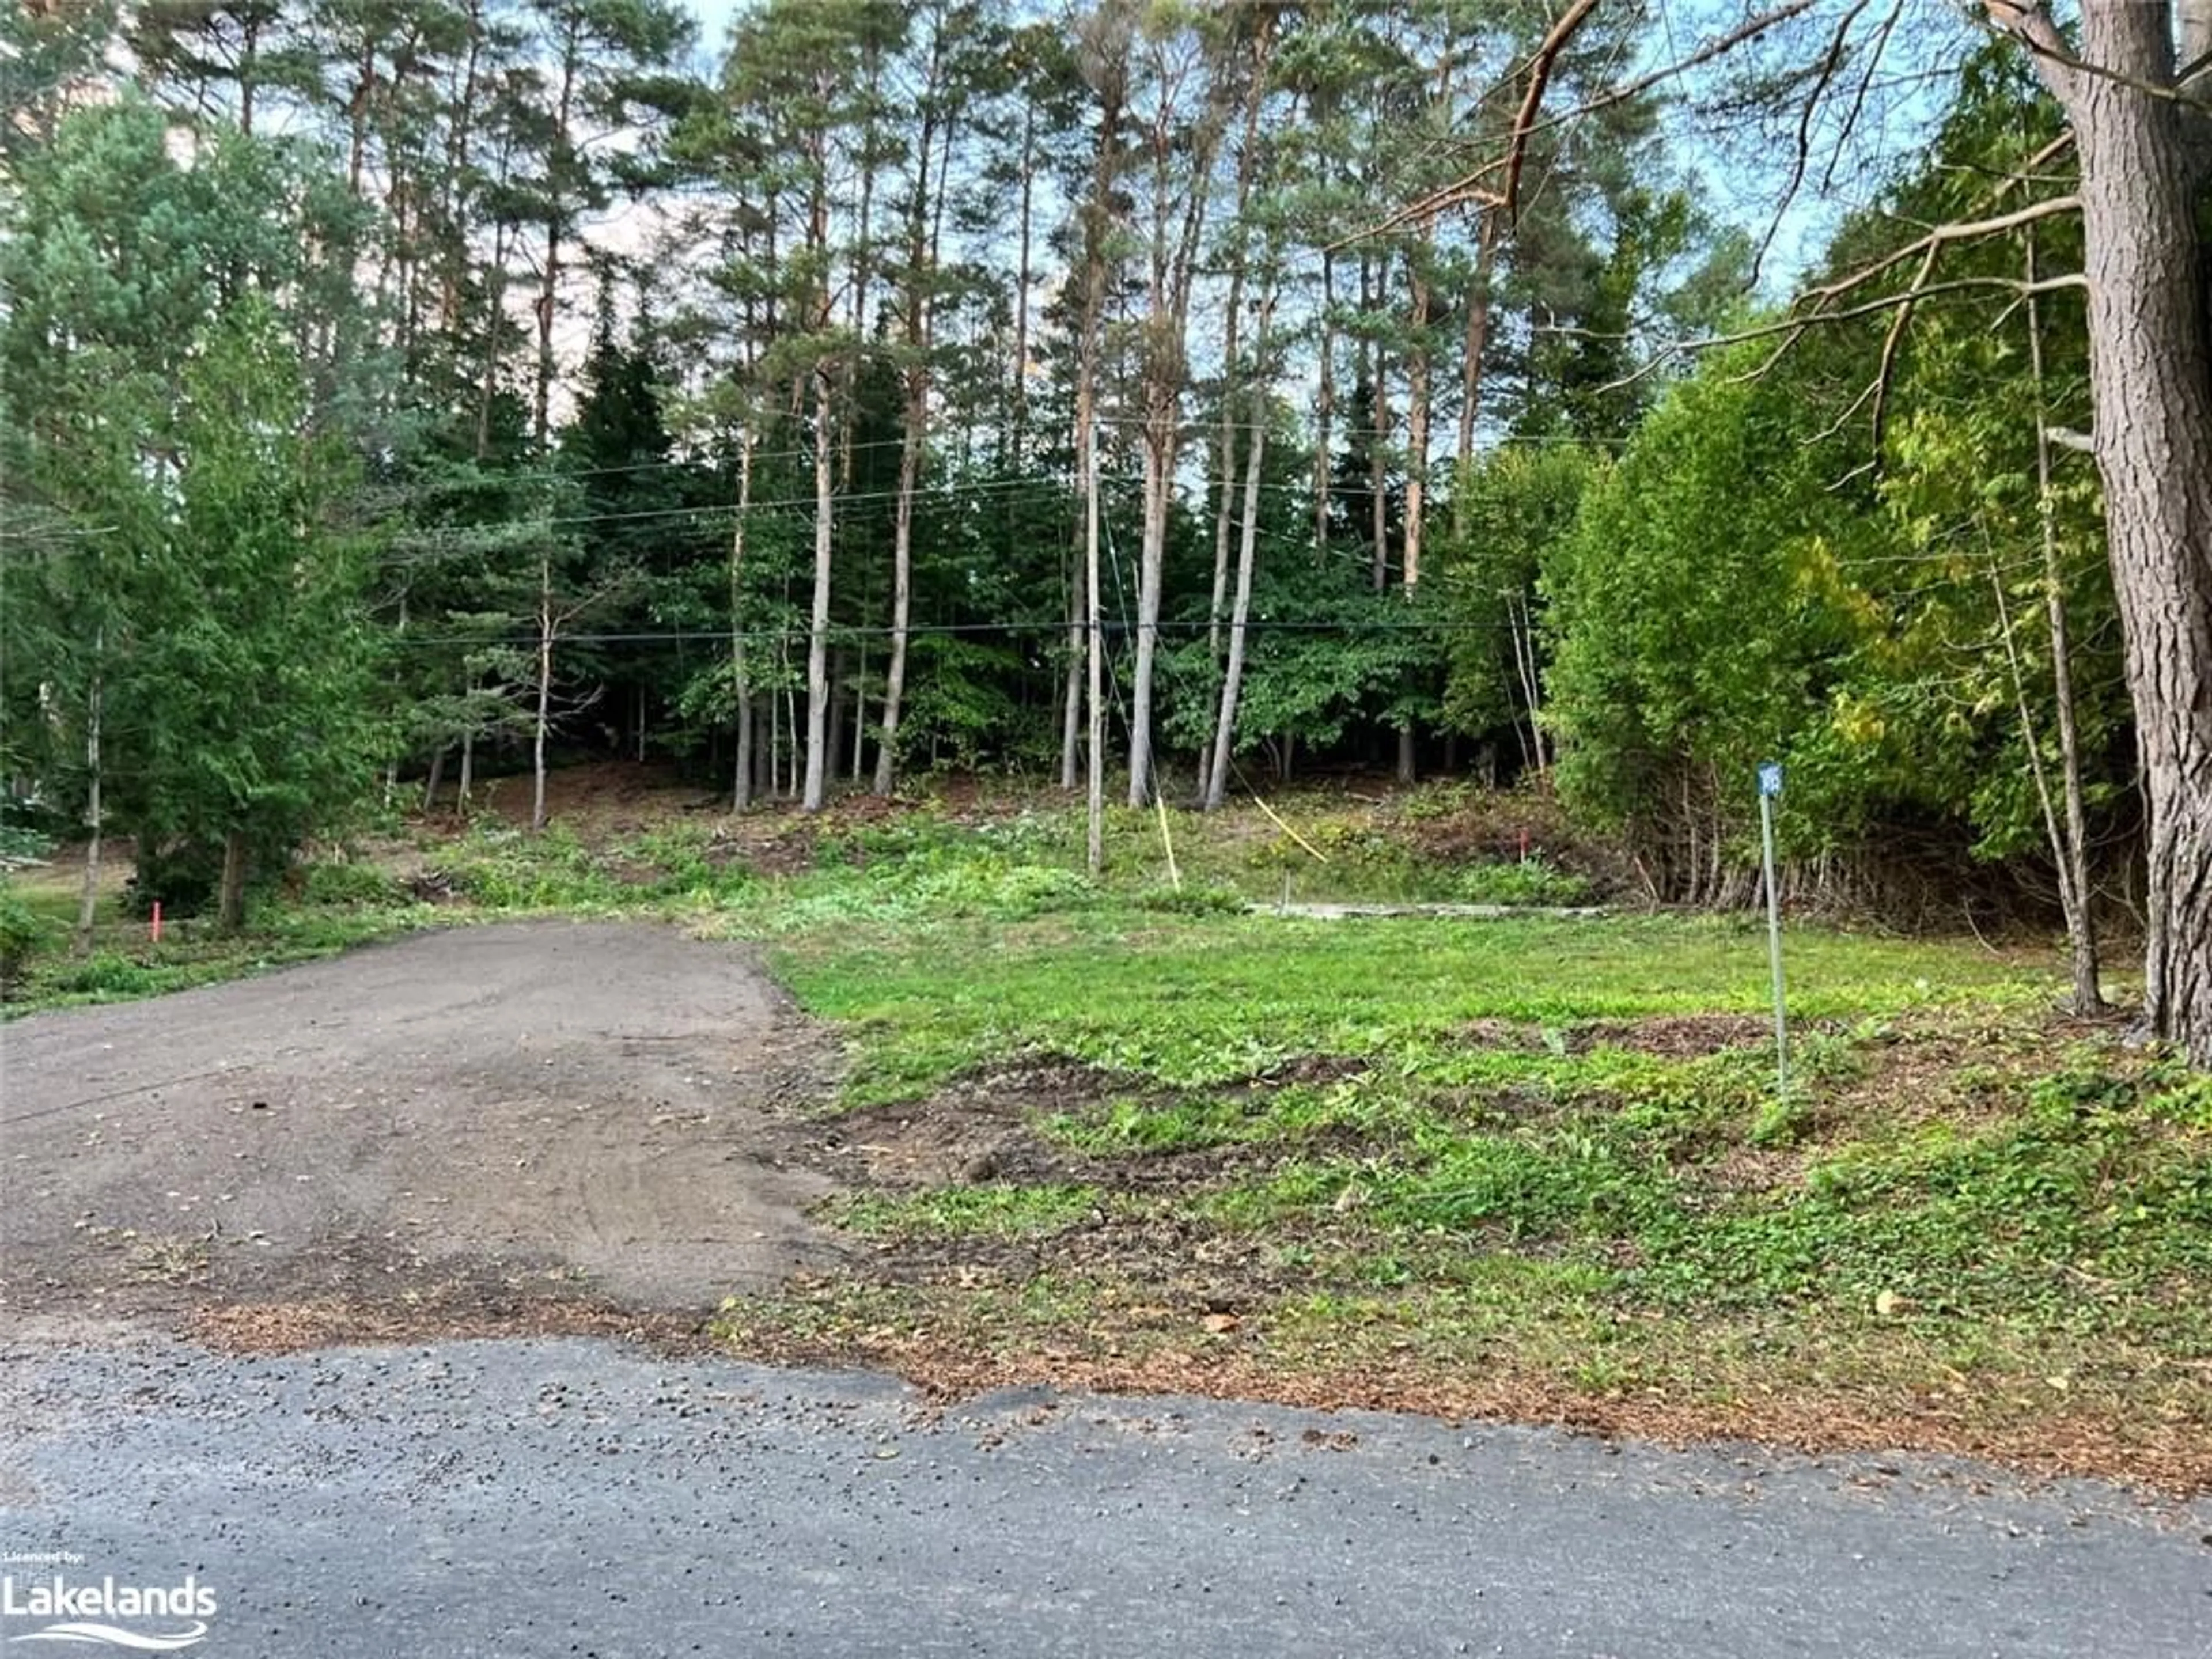 Forest view for 1495 Green Lake Rd, Haliburton Ontario K0M 2S0